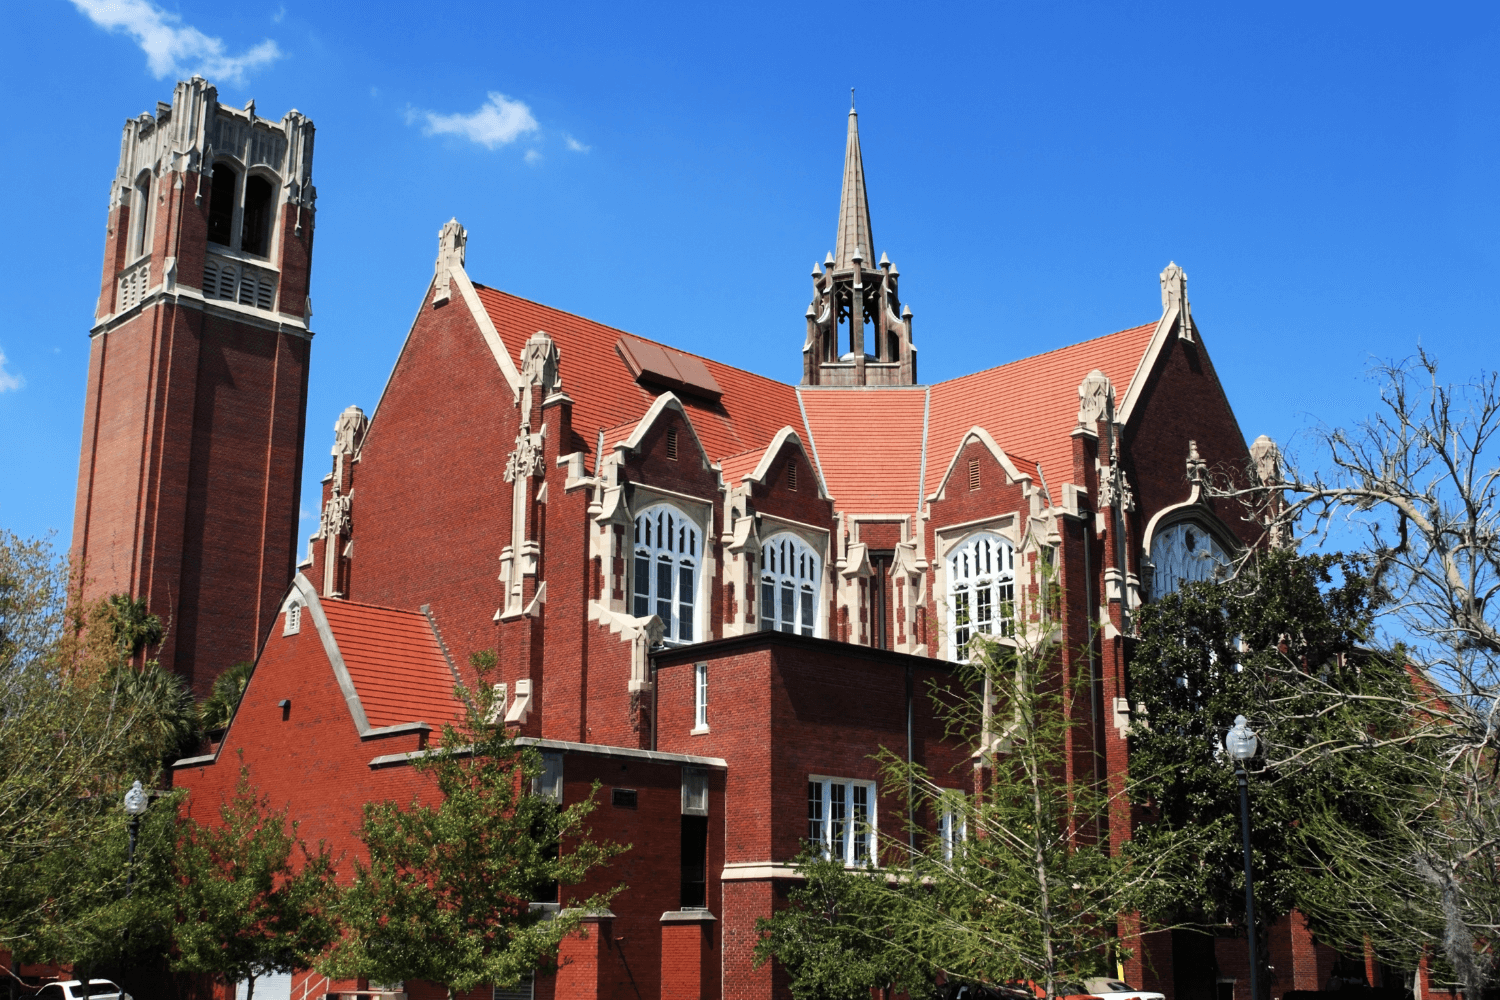 You Need To Explore the Beautiful Campus With a University of Florida Tour